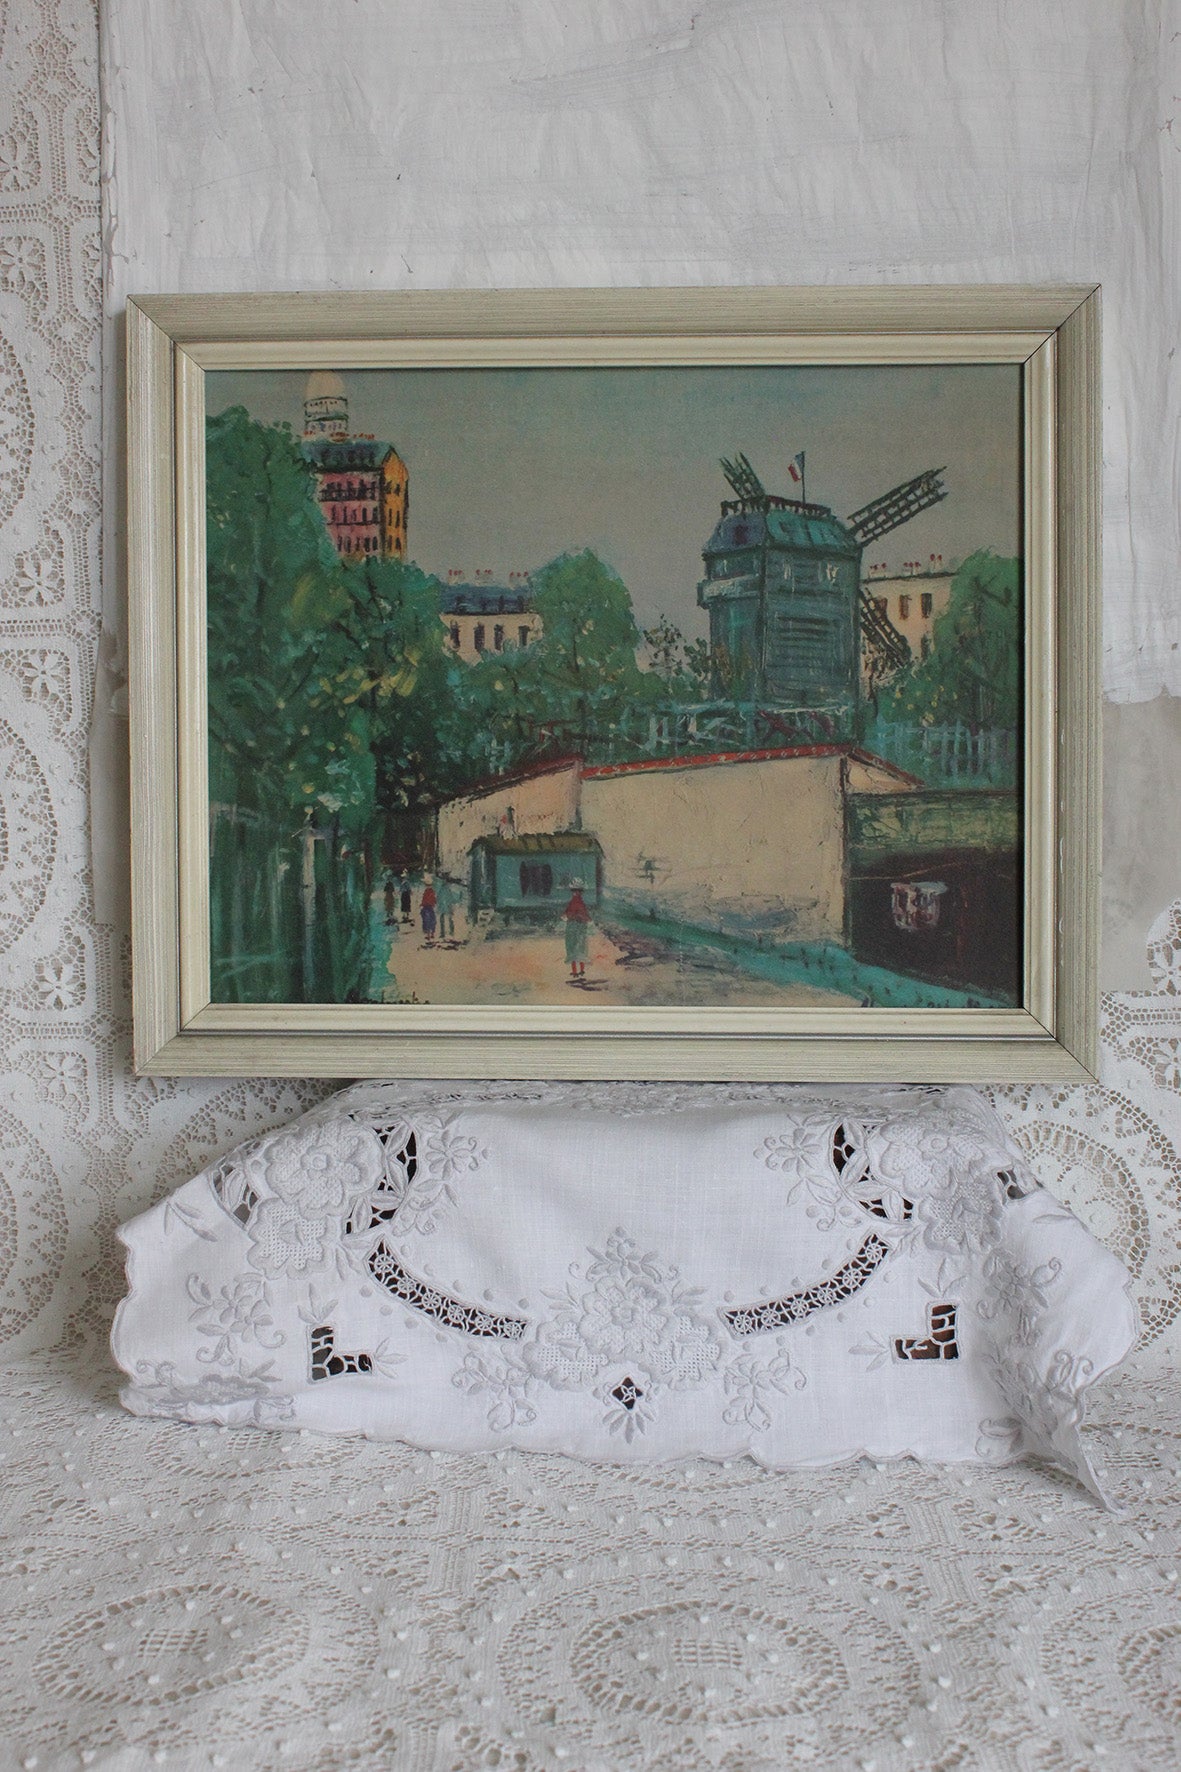 Old Maurice Utrillo Print - "Montmartre"